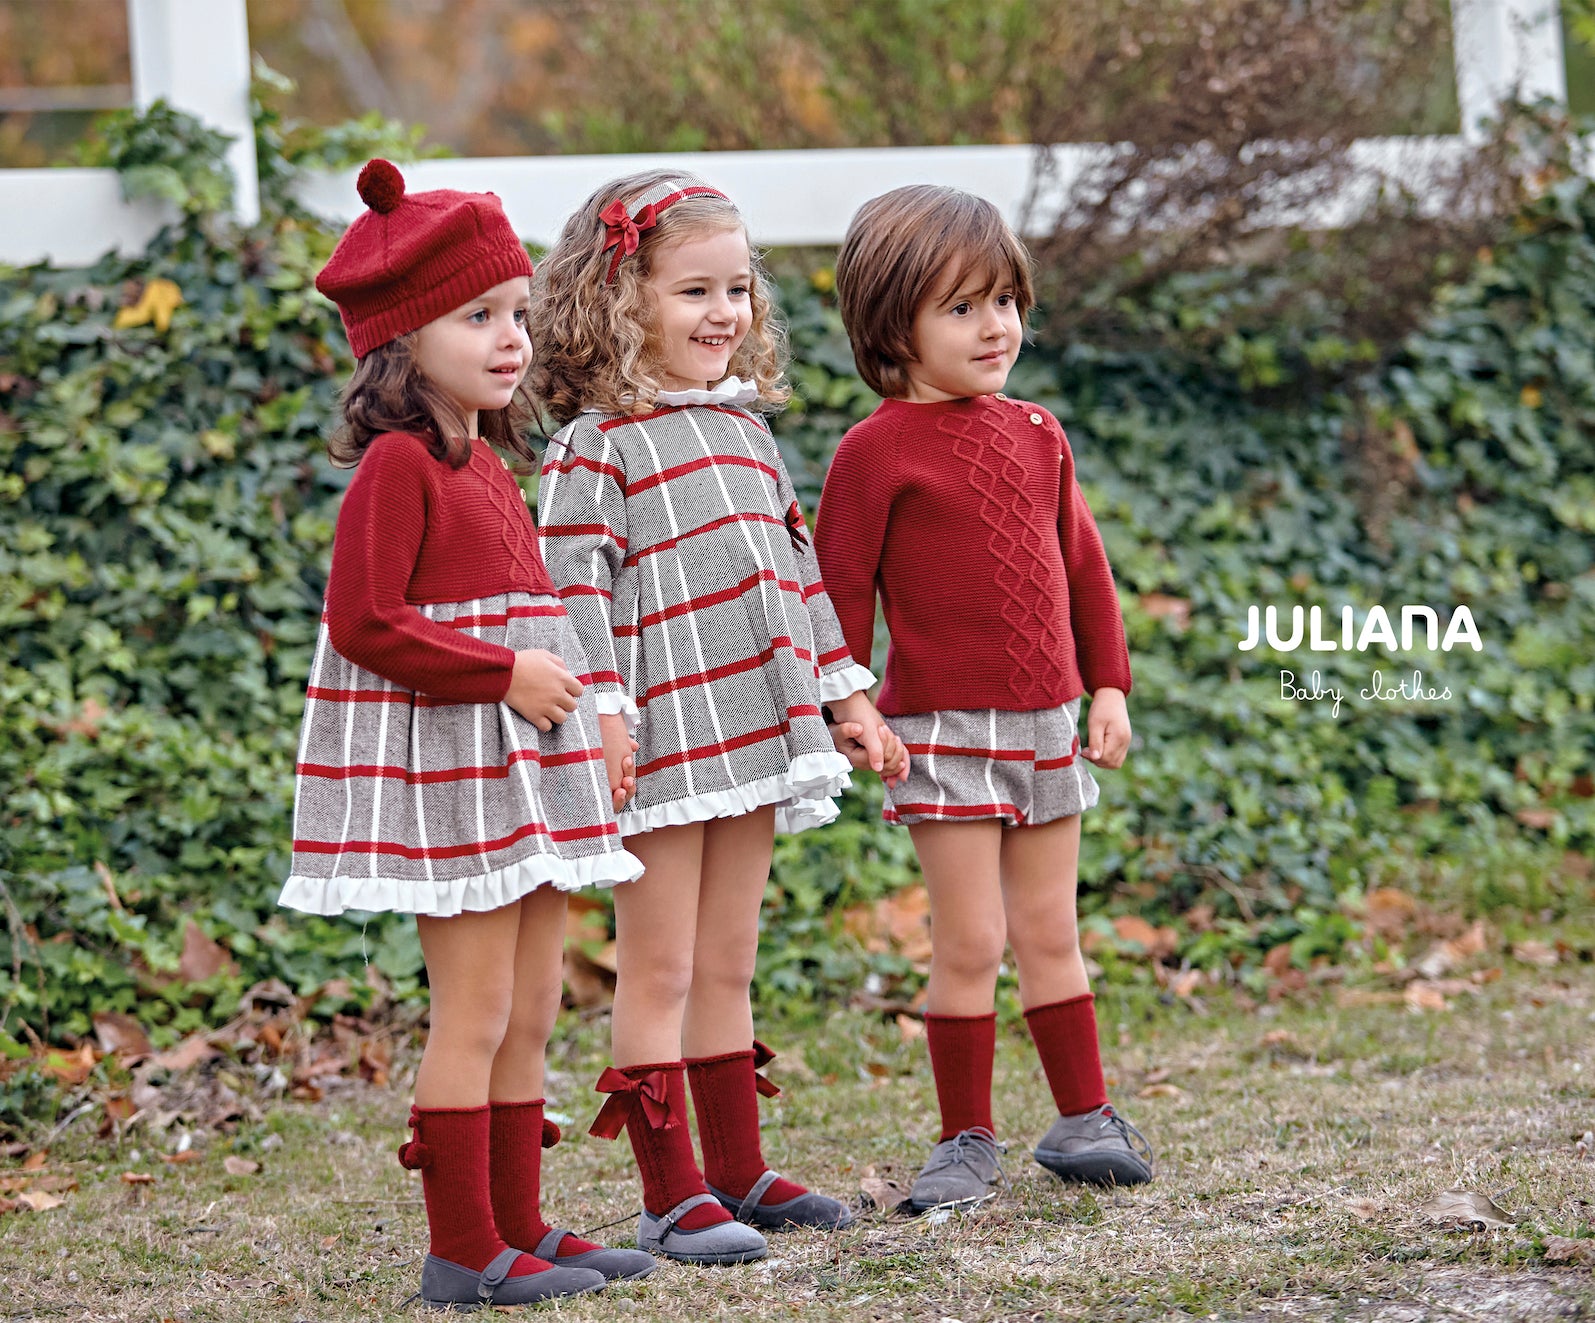 This Juliana branded dress is perfect for keeping your little one warm in the winter. It is finished in a red and black checked design, with a white frill collar and a small red bow to the side. It features a button fastening on the reverse, available in sizes 3 months up to 4 years old.